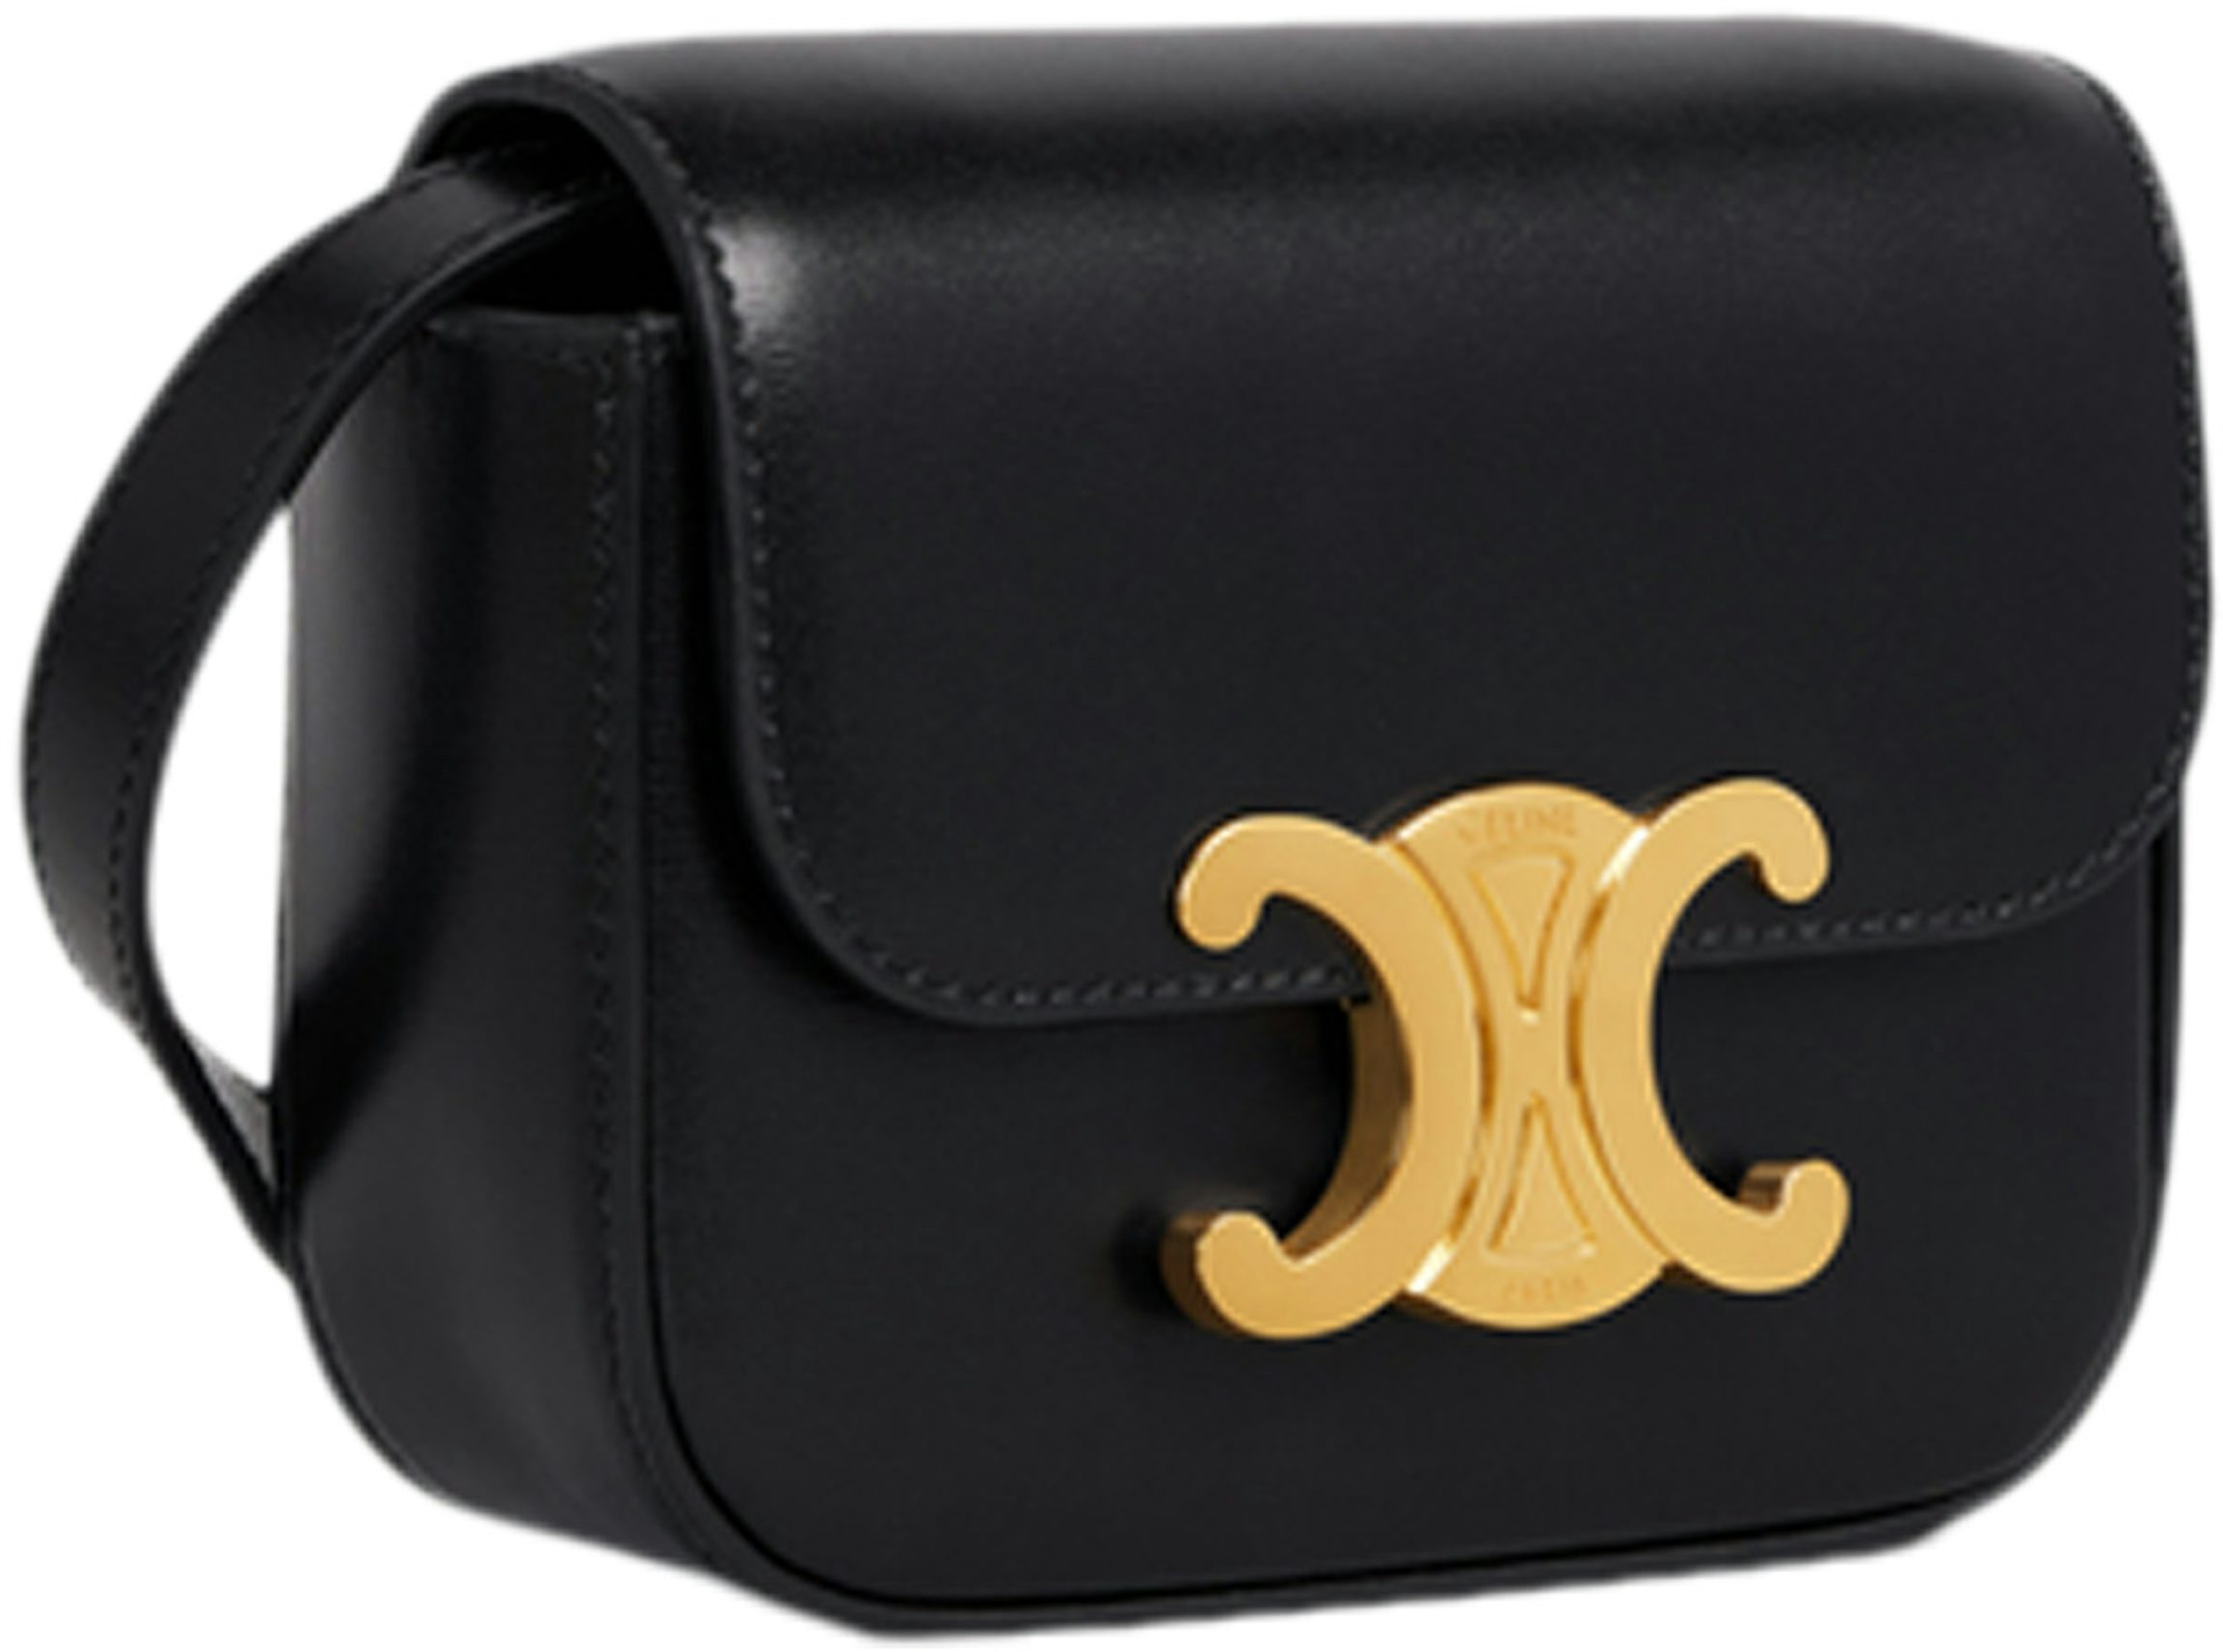 Celine Triomphe Chain Shoulder Bag Black in Shiny Calfskin Leather with  Gold-tone - US